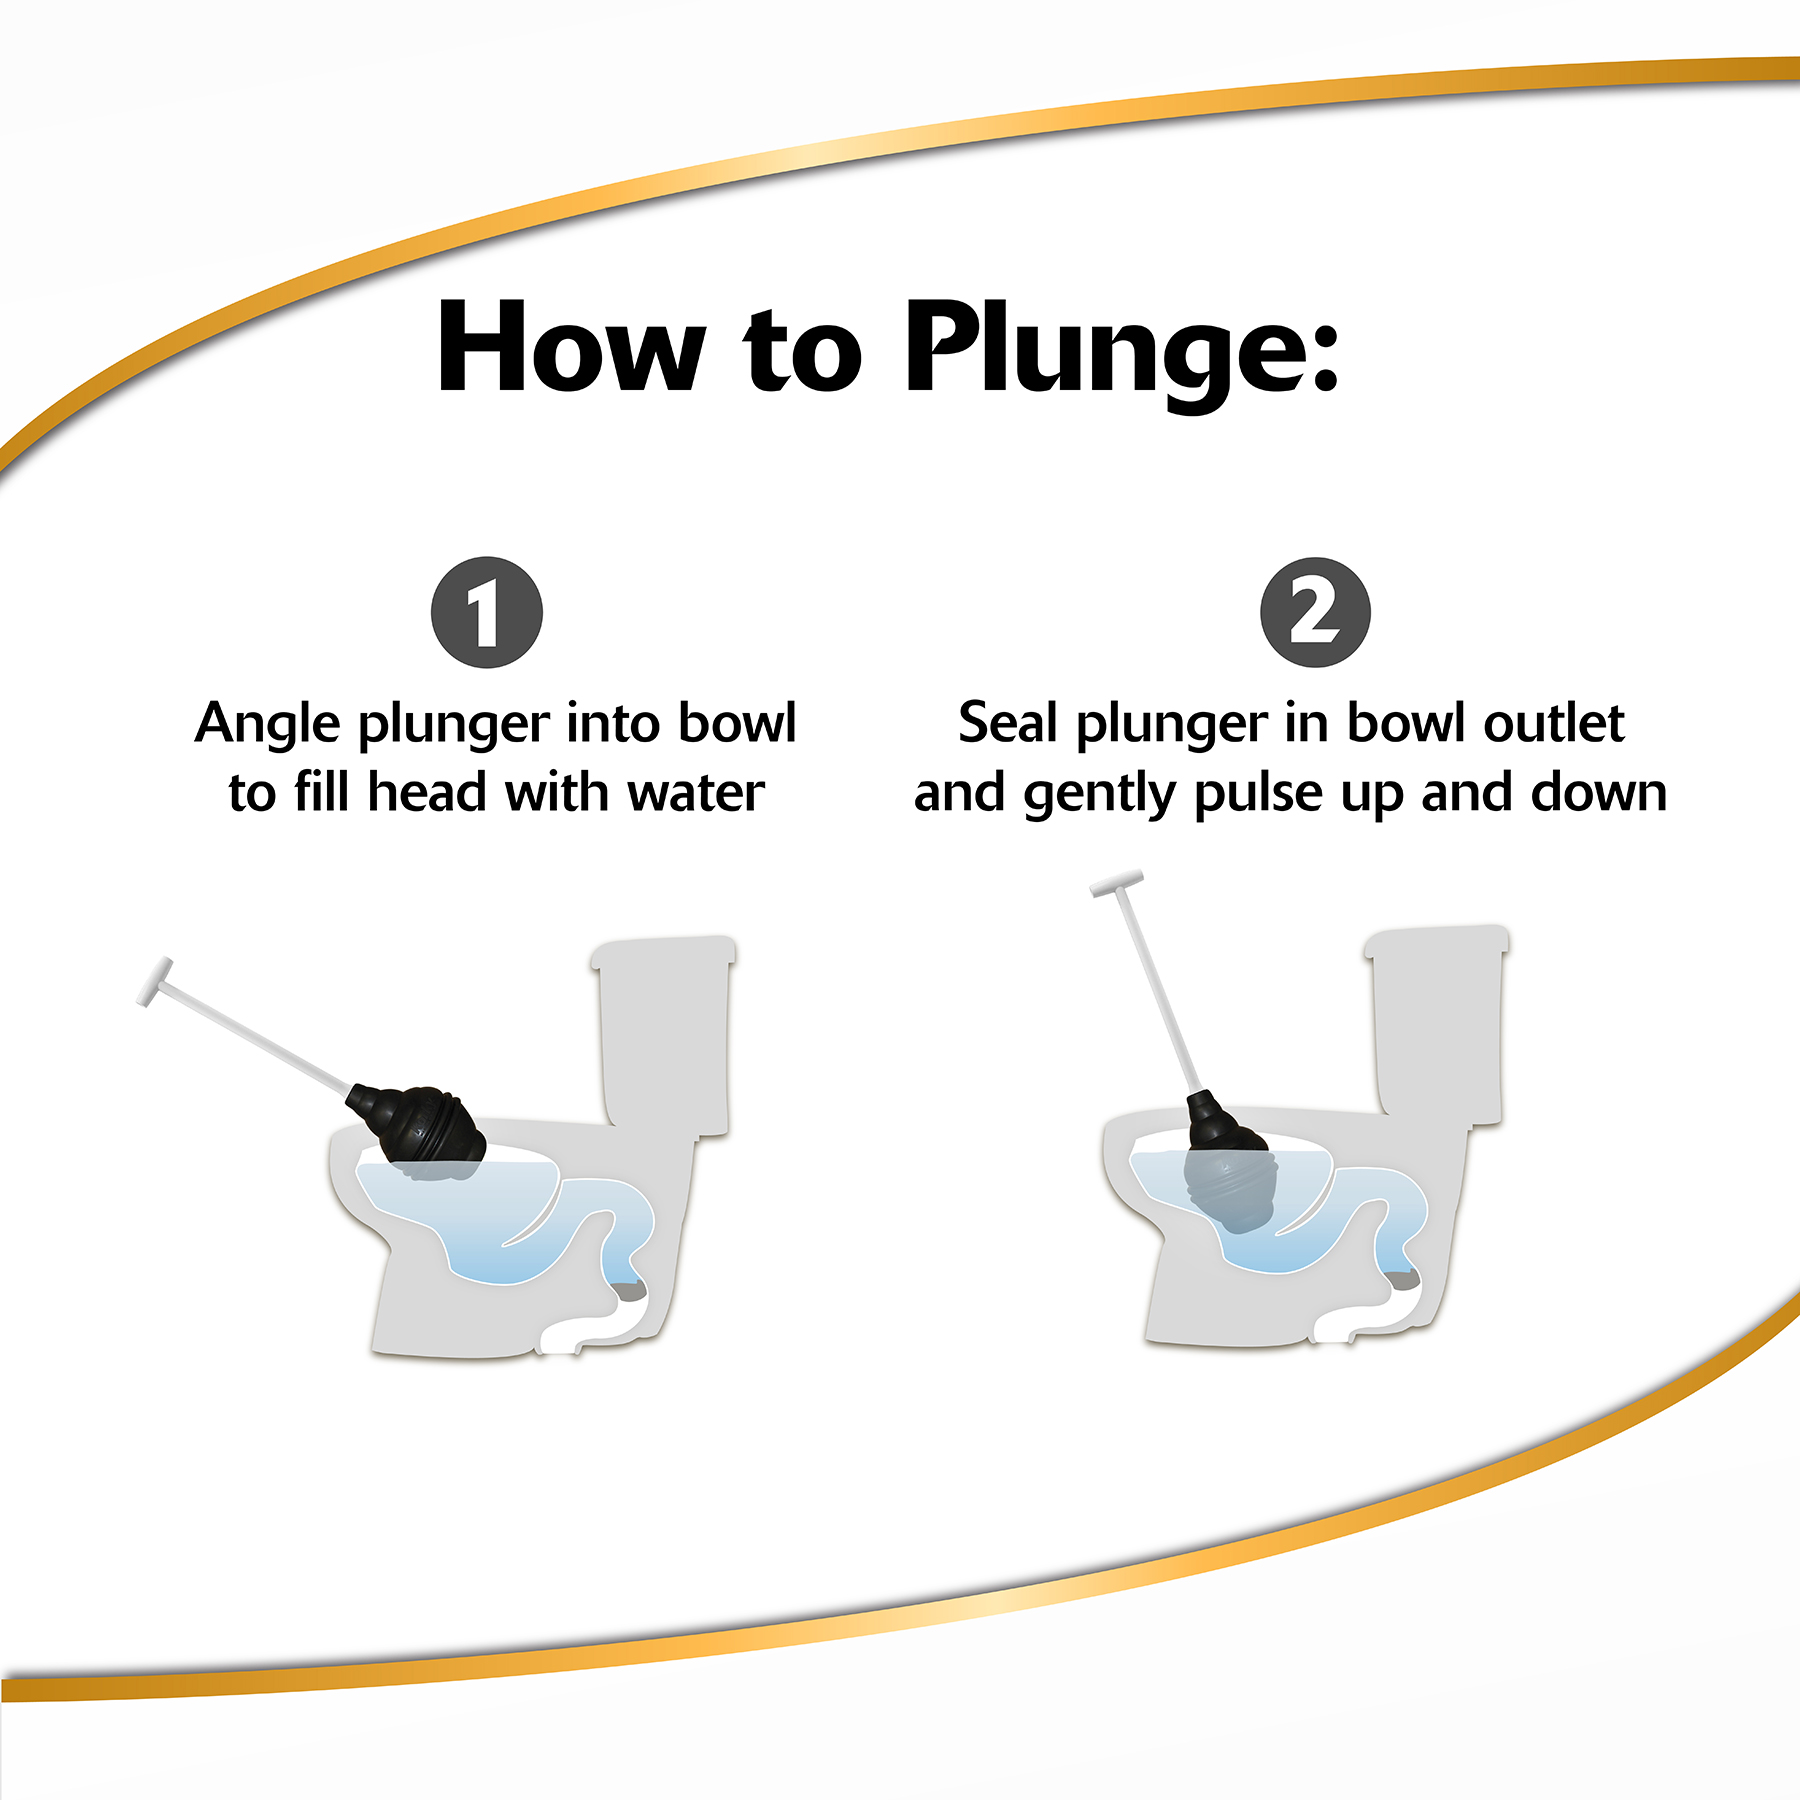 This image depicts how to plunge a toilet. Angle the plunger into the bowl to fill head with water. Seal plunger in bowl outlet and gently pulse up and down.